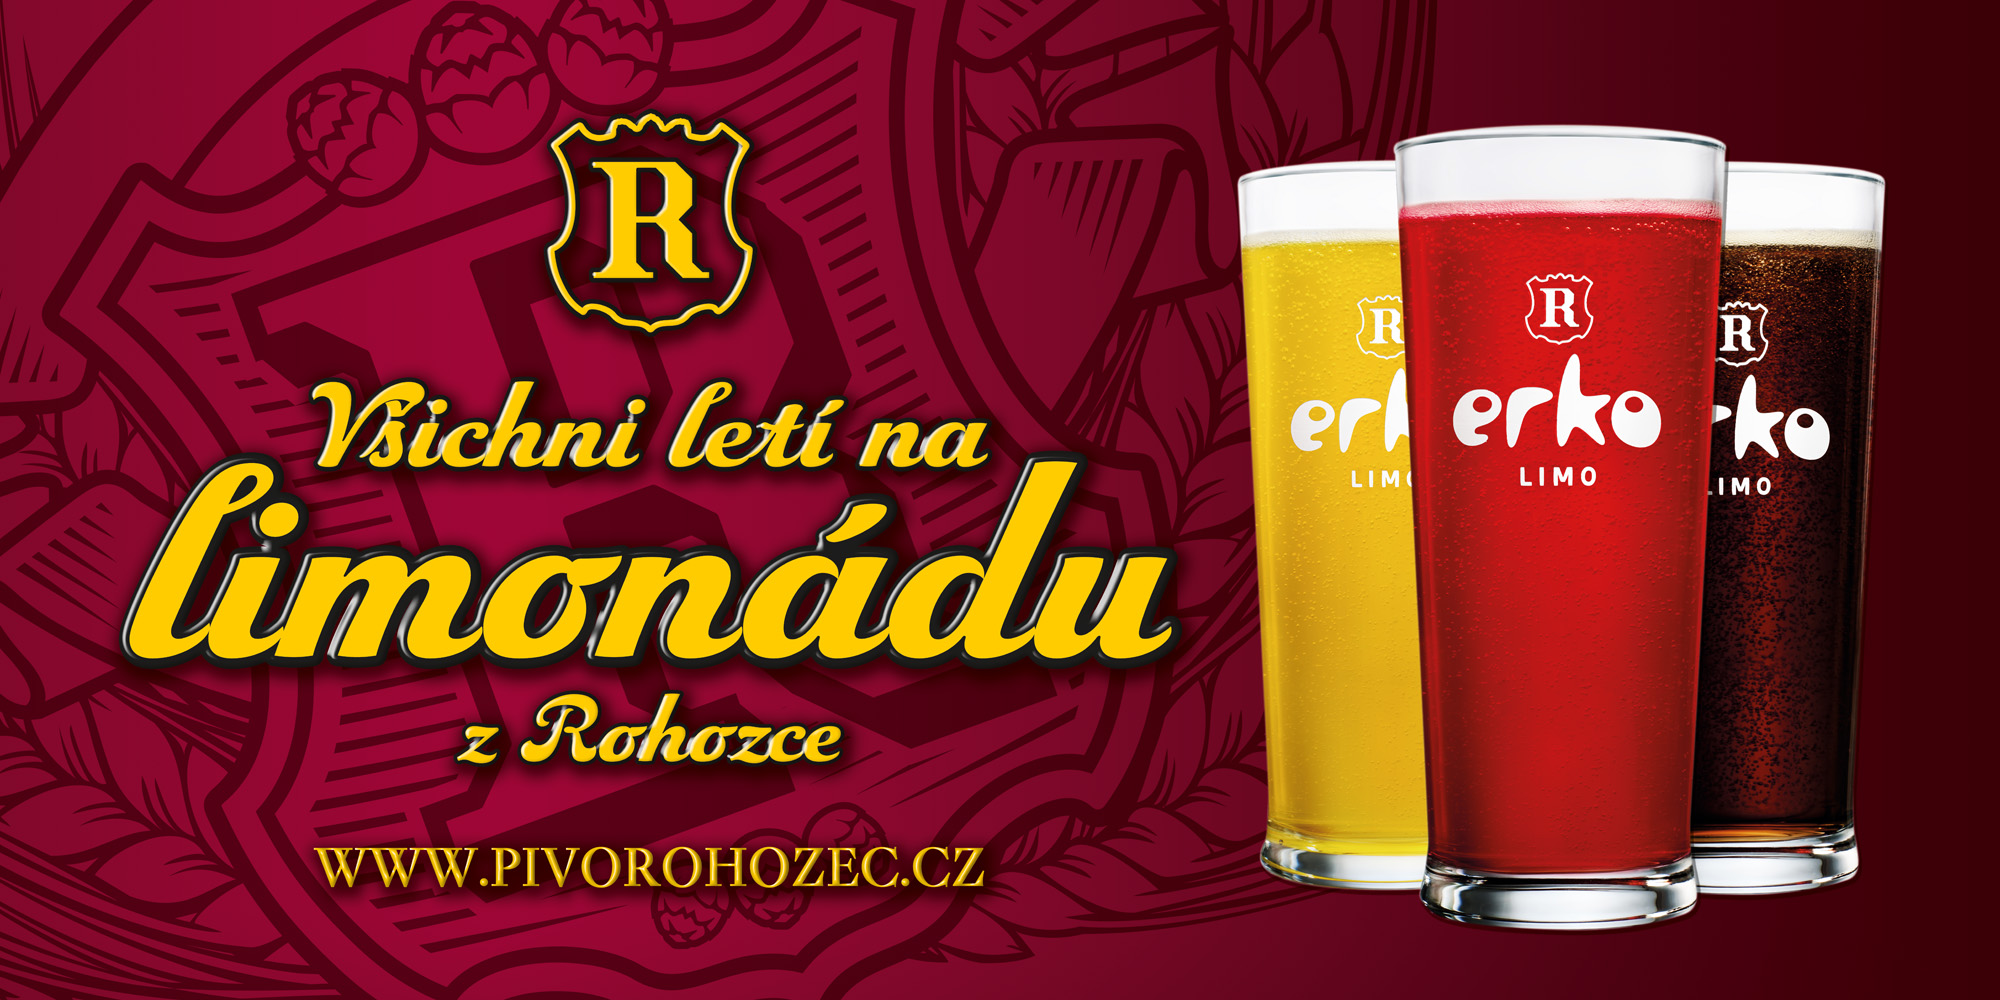 Rohozec beer, beer specials from the brewery in the Bohemian Paradise, the Czech Republic